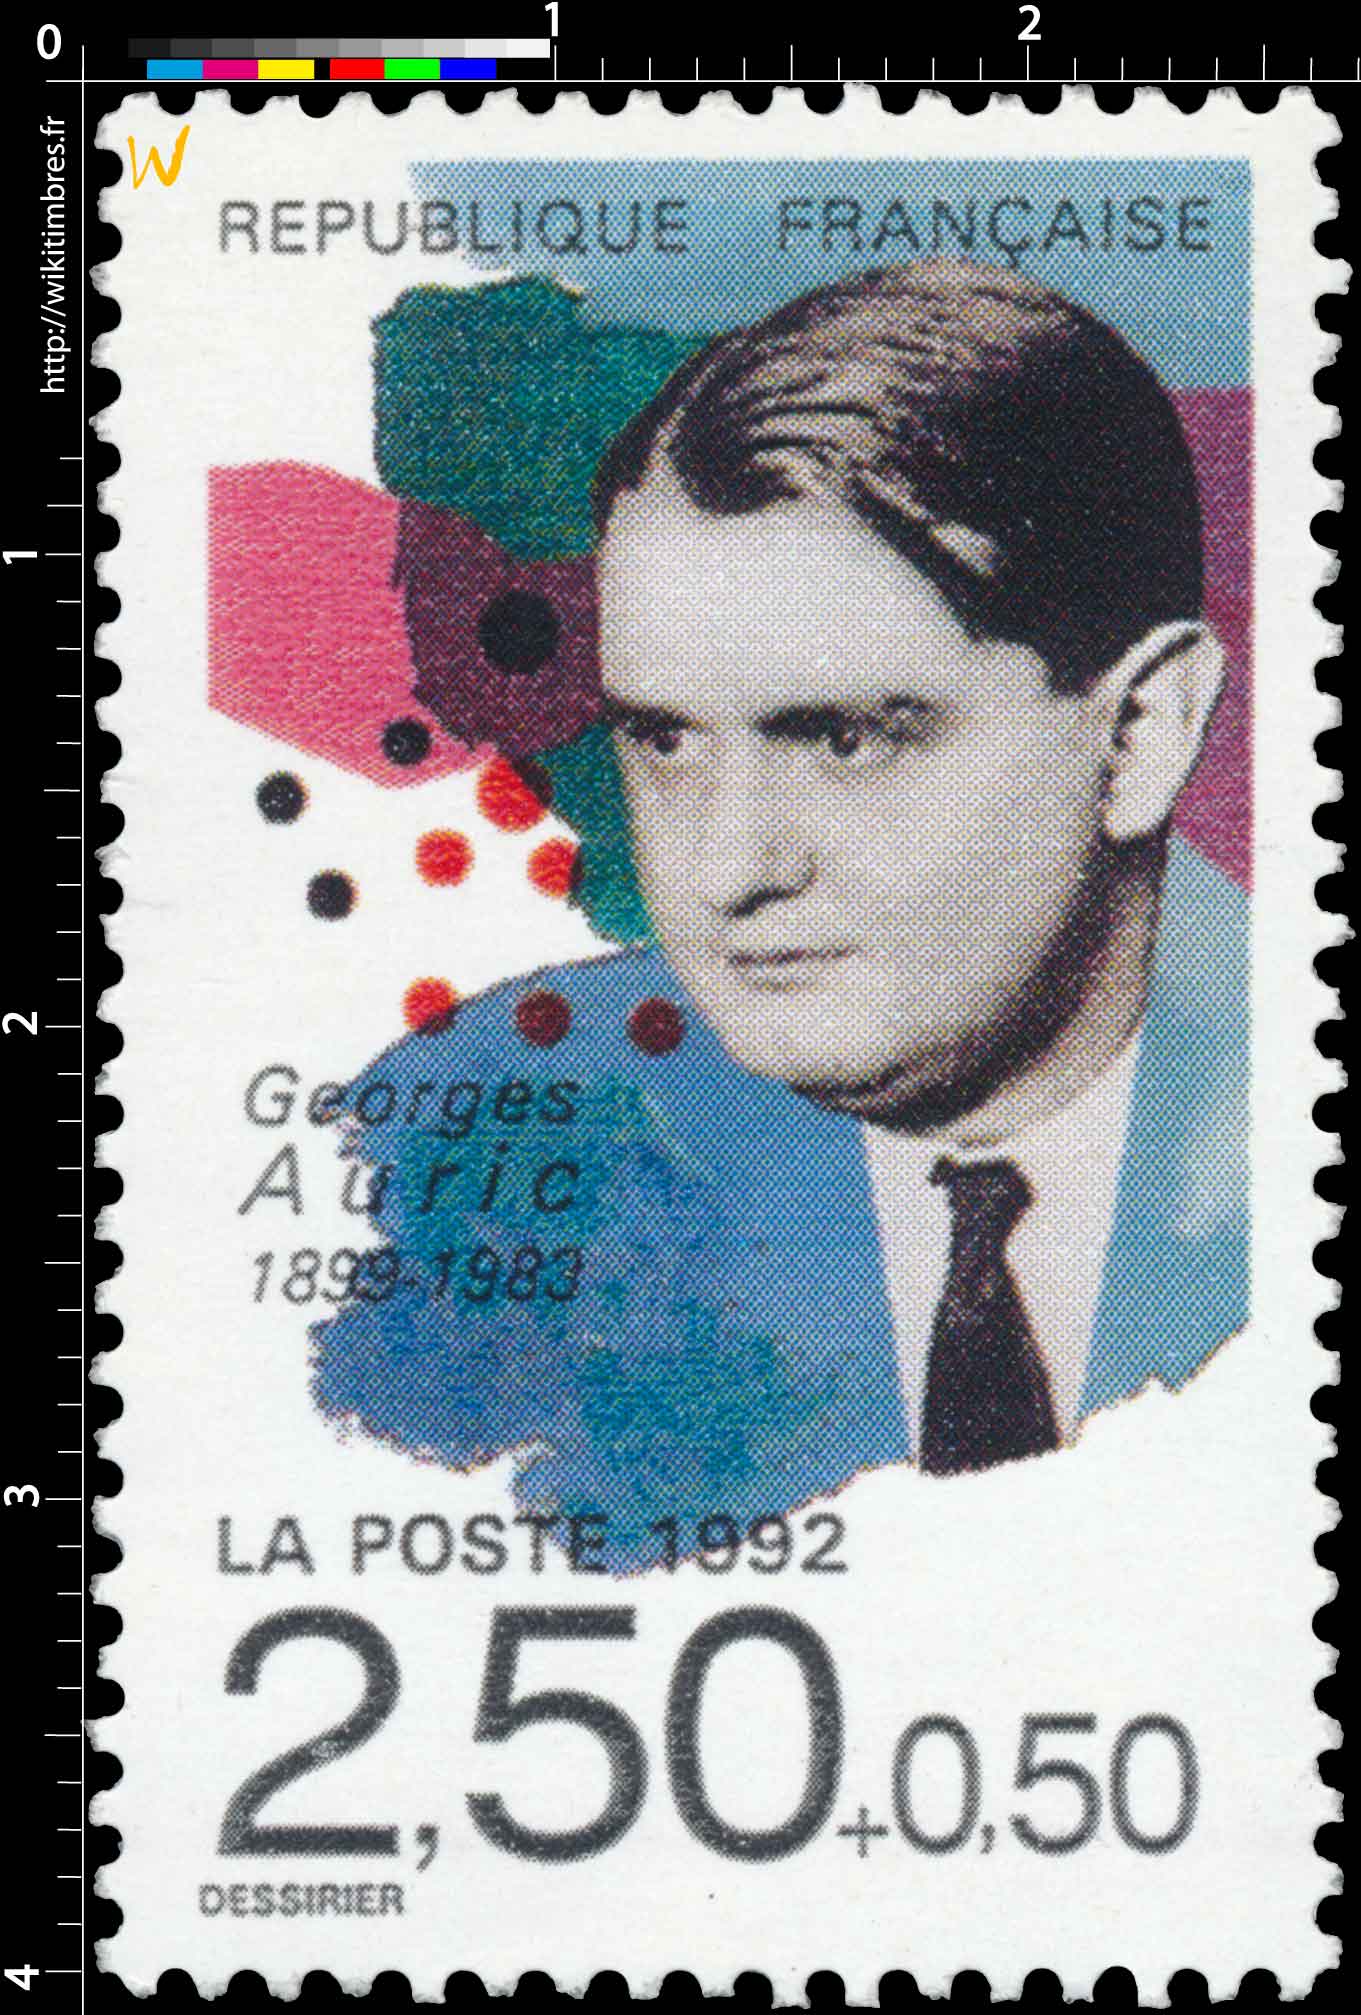 1992 Georges Auric 1899-1983